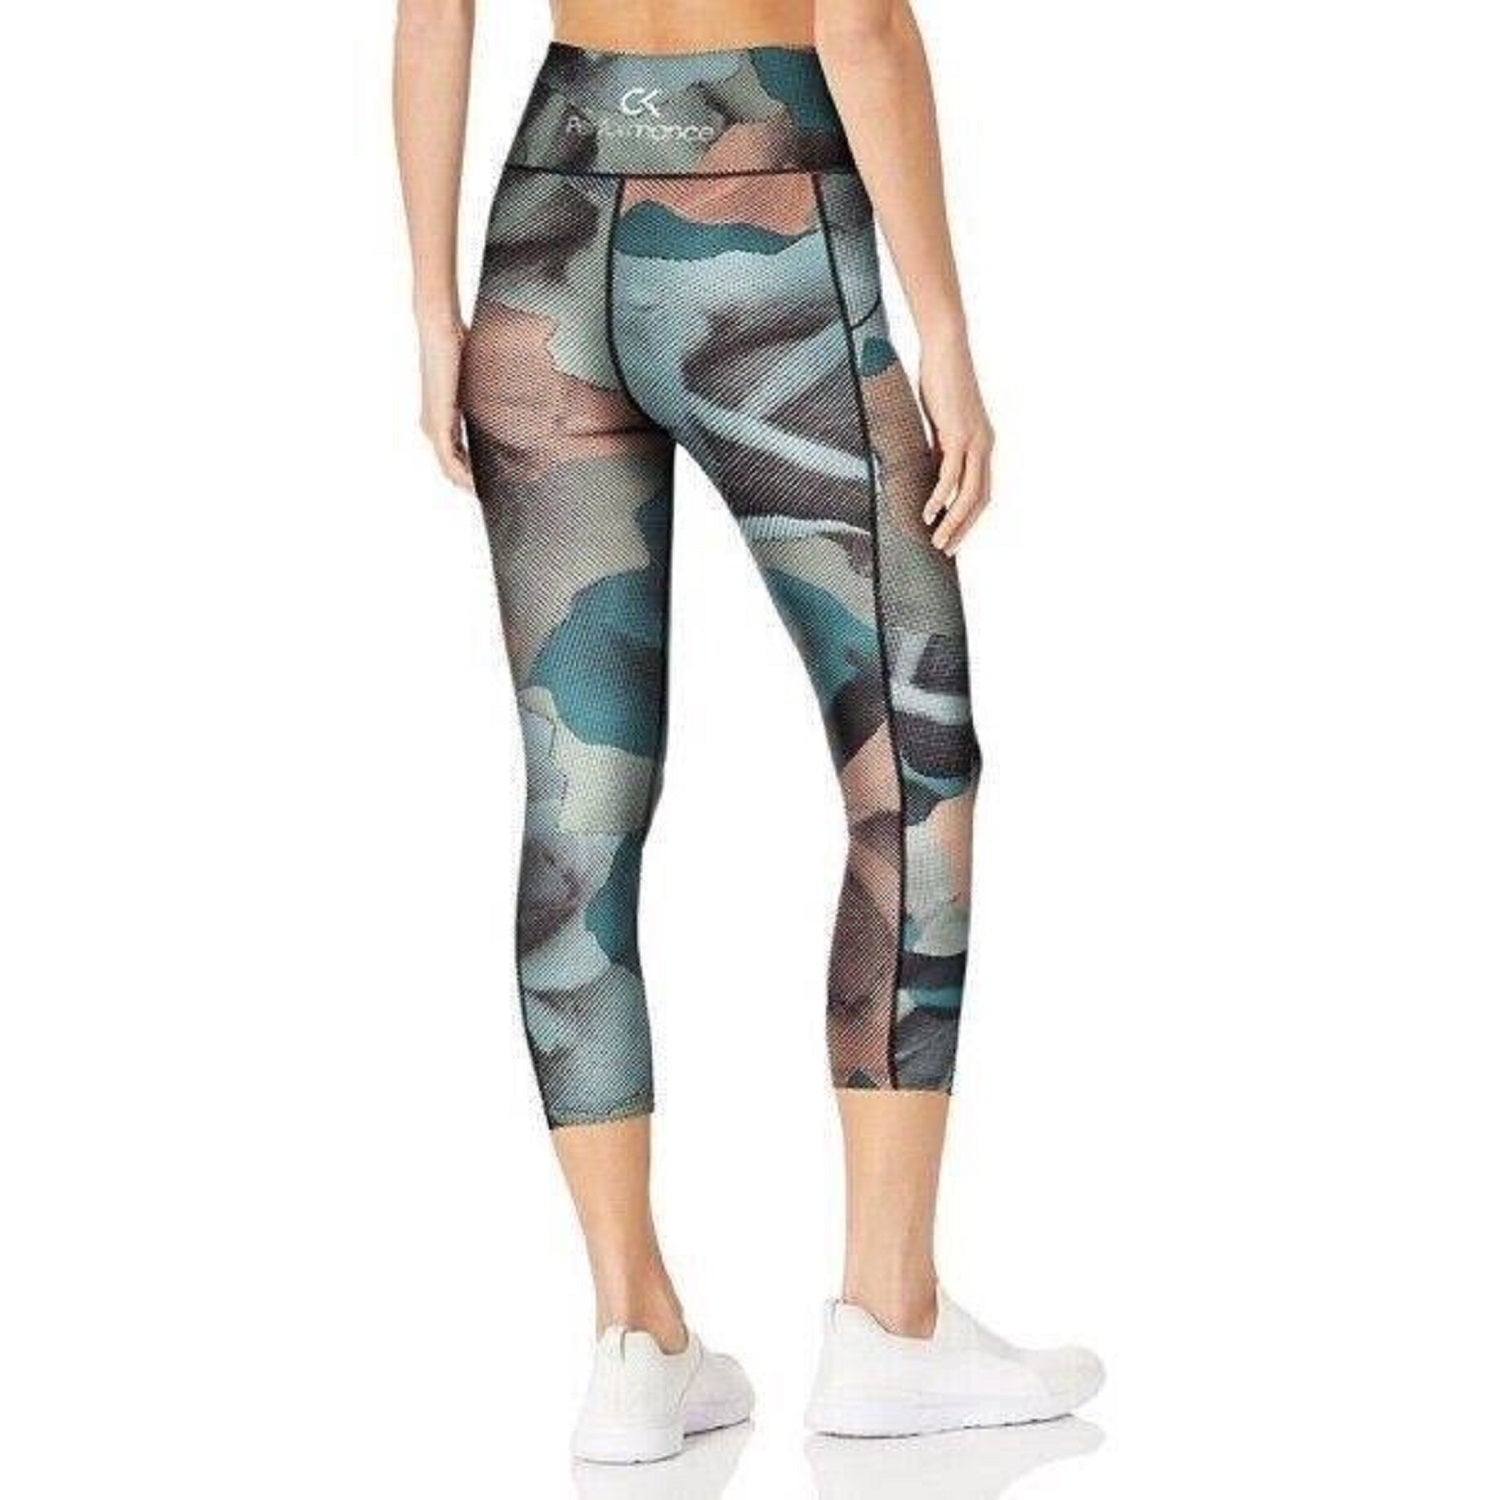 Calvin Klein Women's Performance Printed Cropped Leggings Blue Size X-Small